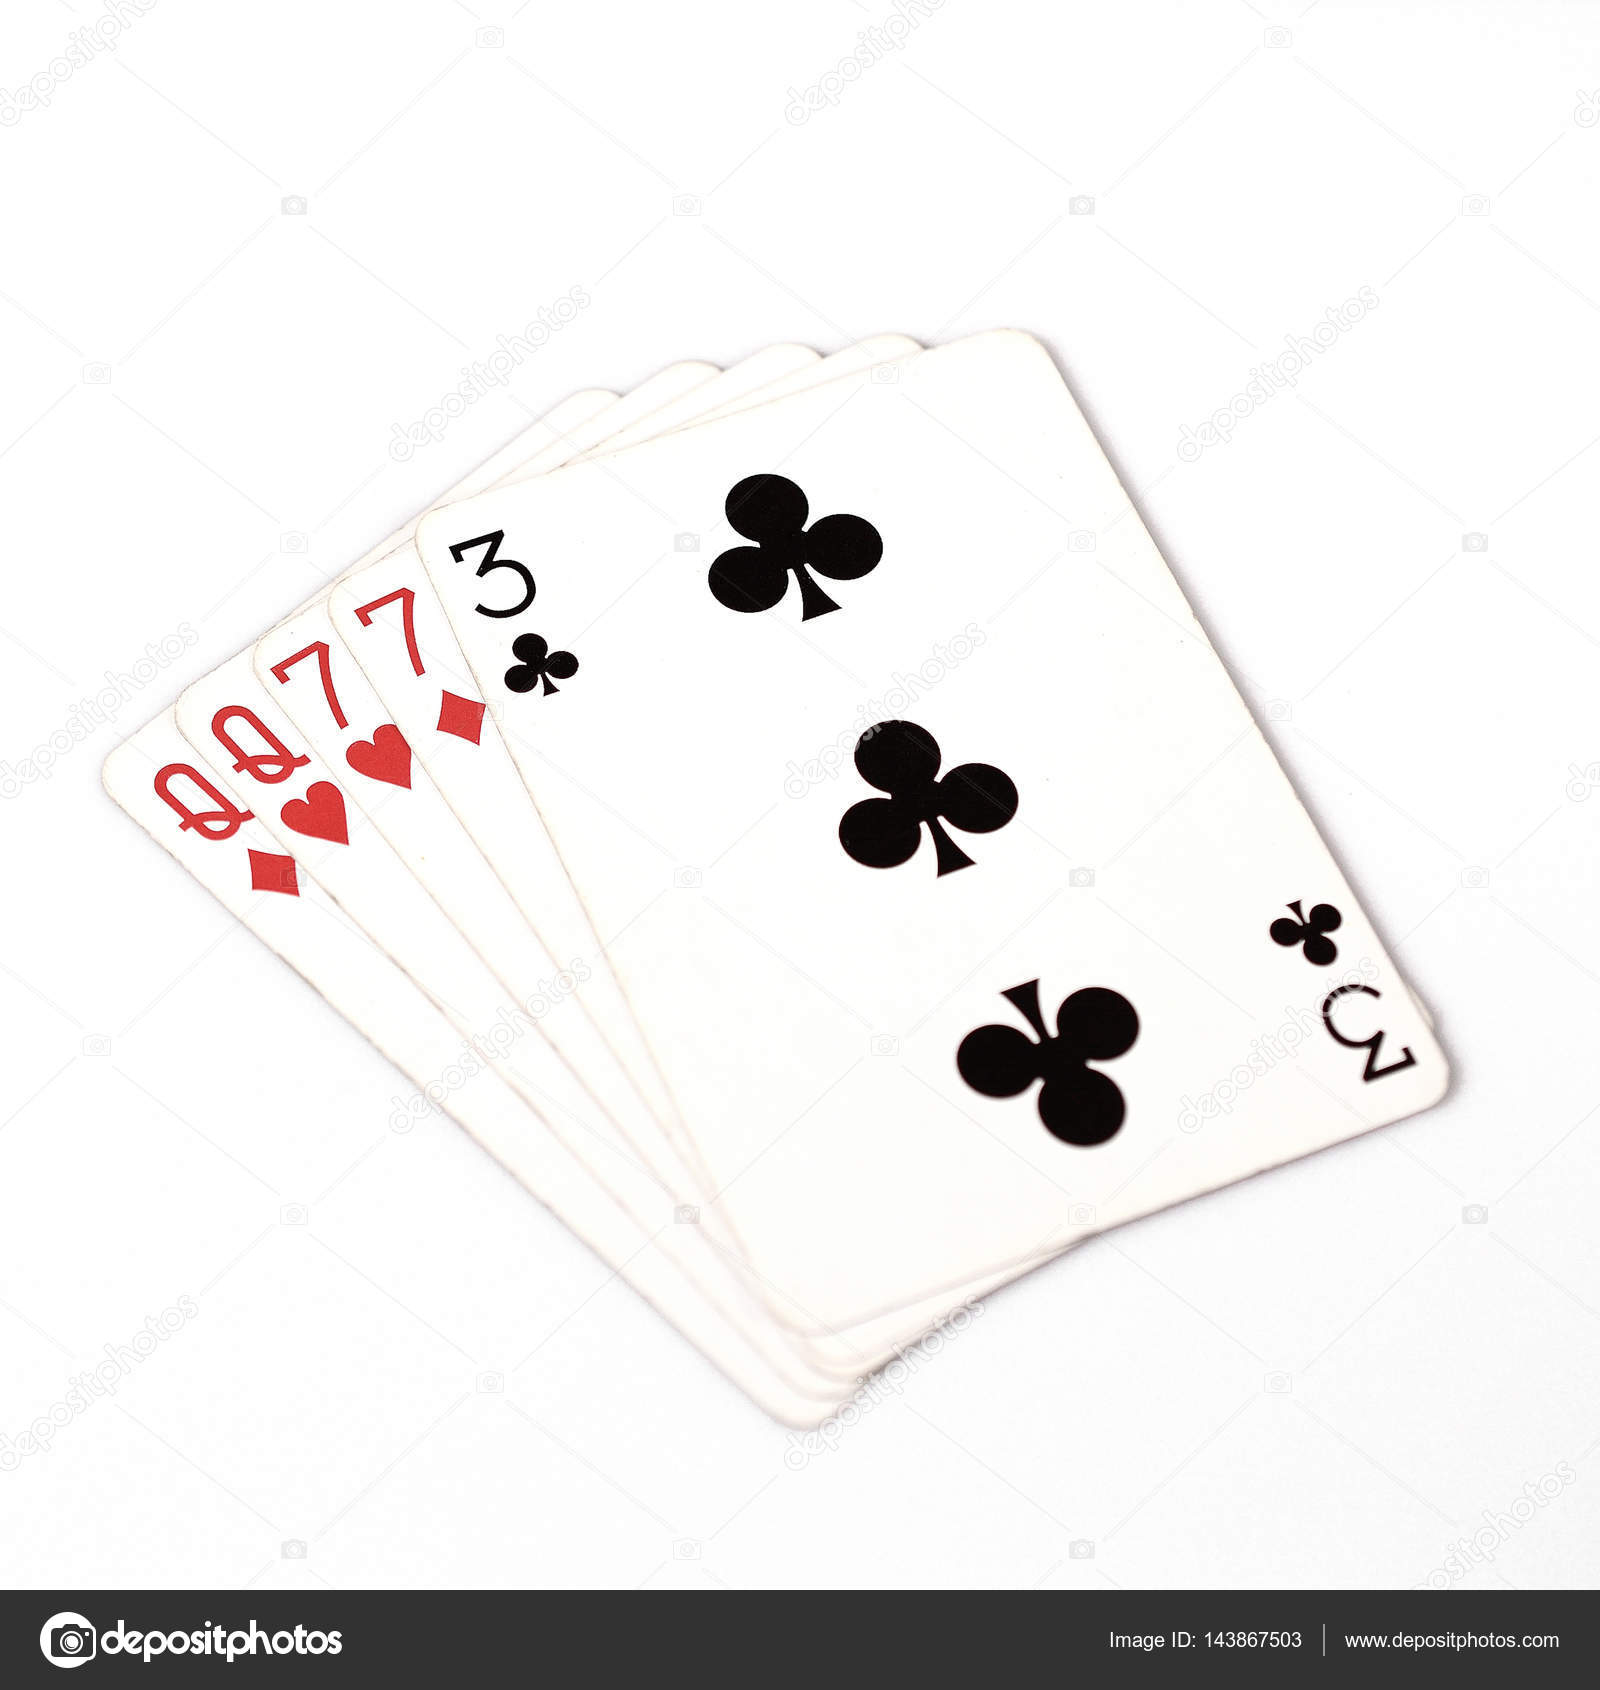 Poker hand ranking, symbol set Playing cards in casino: two pairs ...